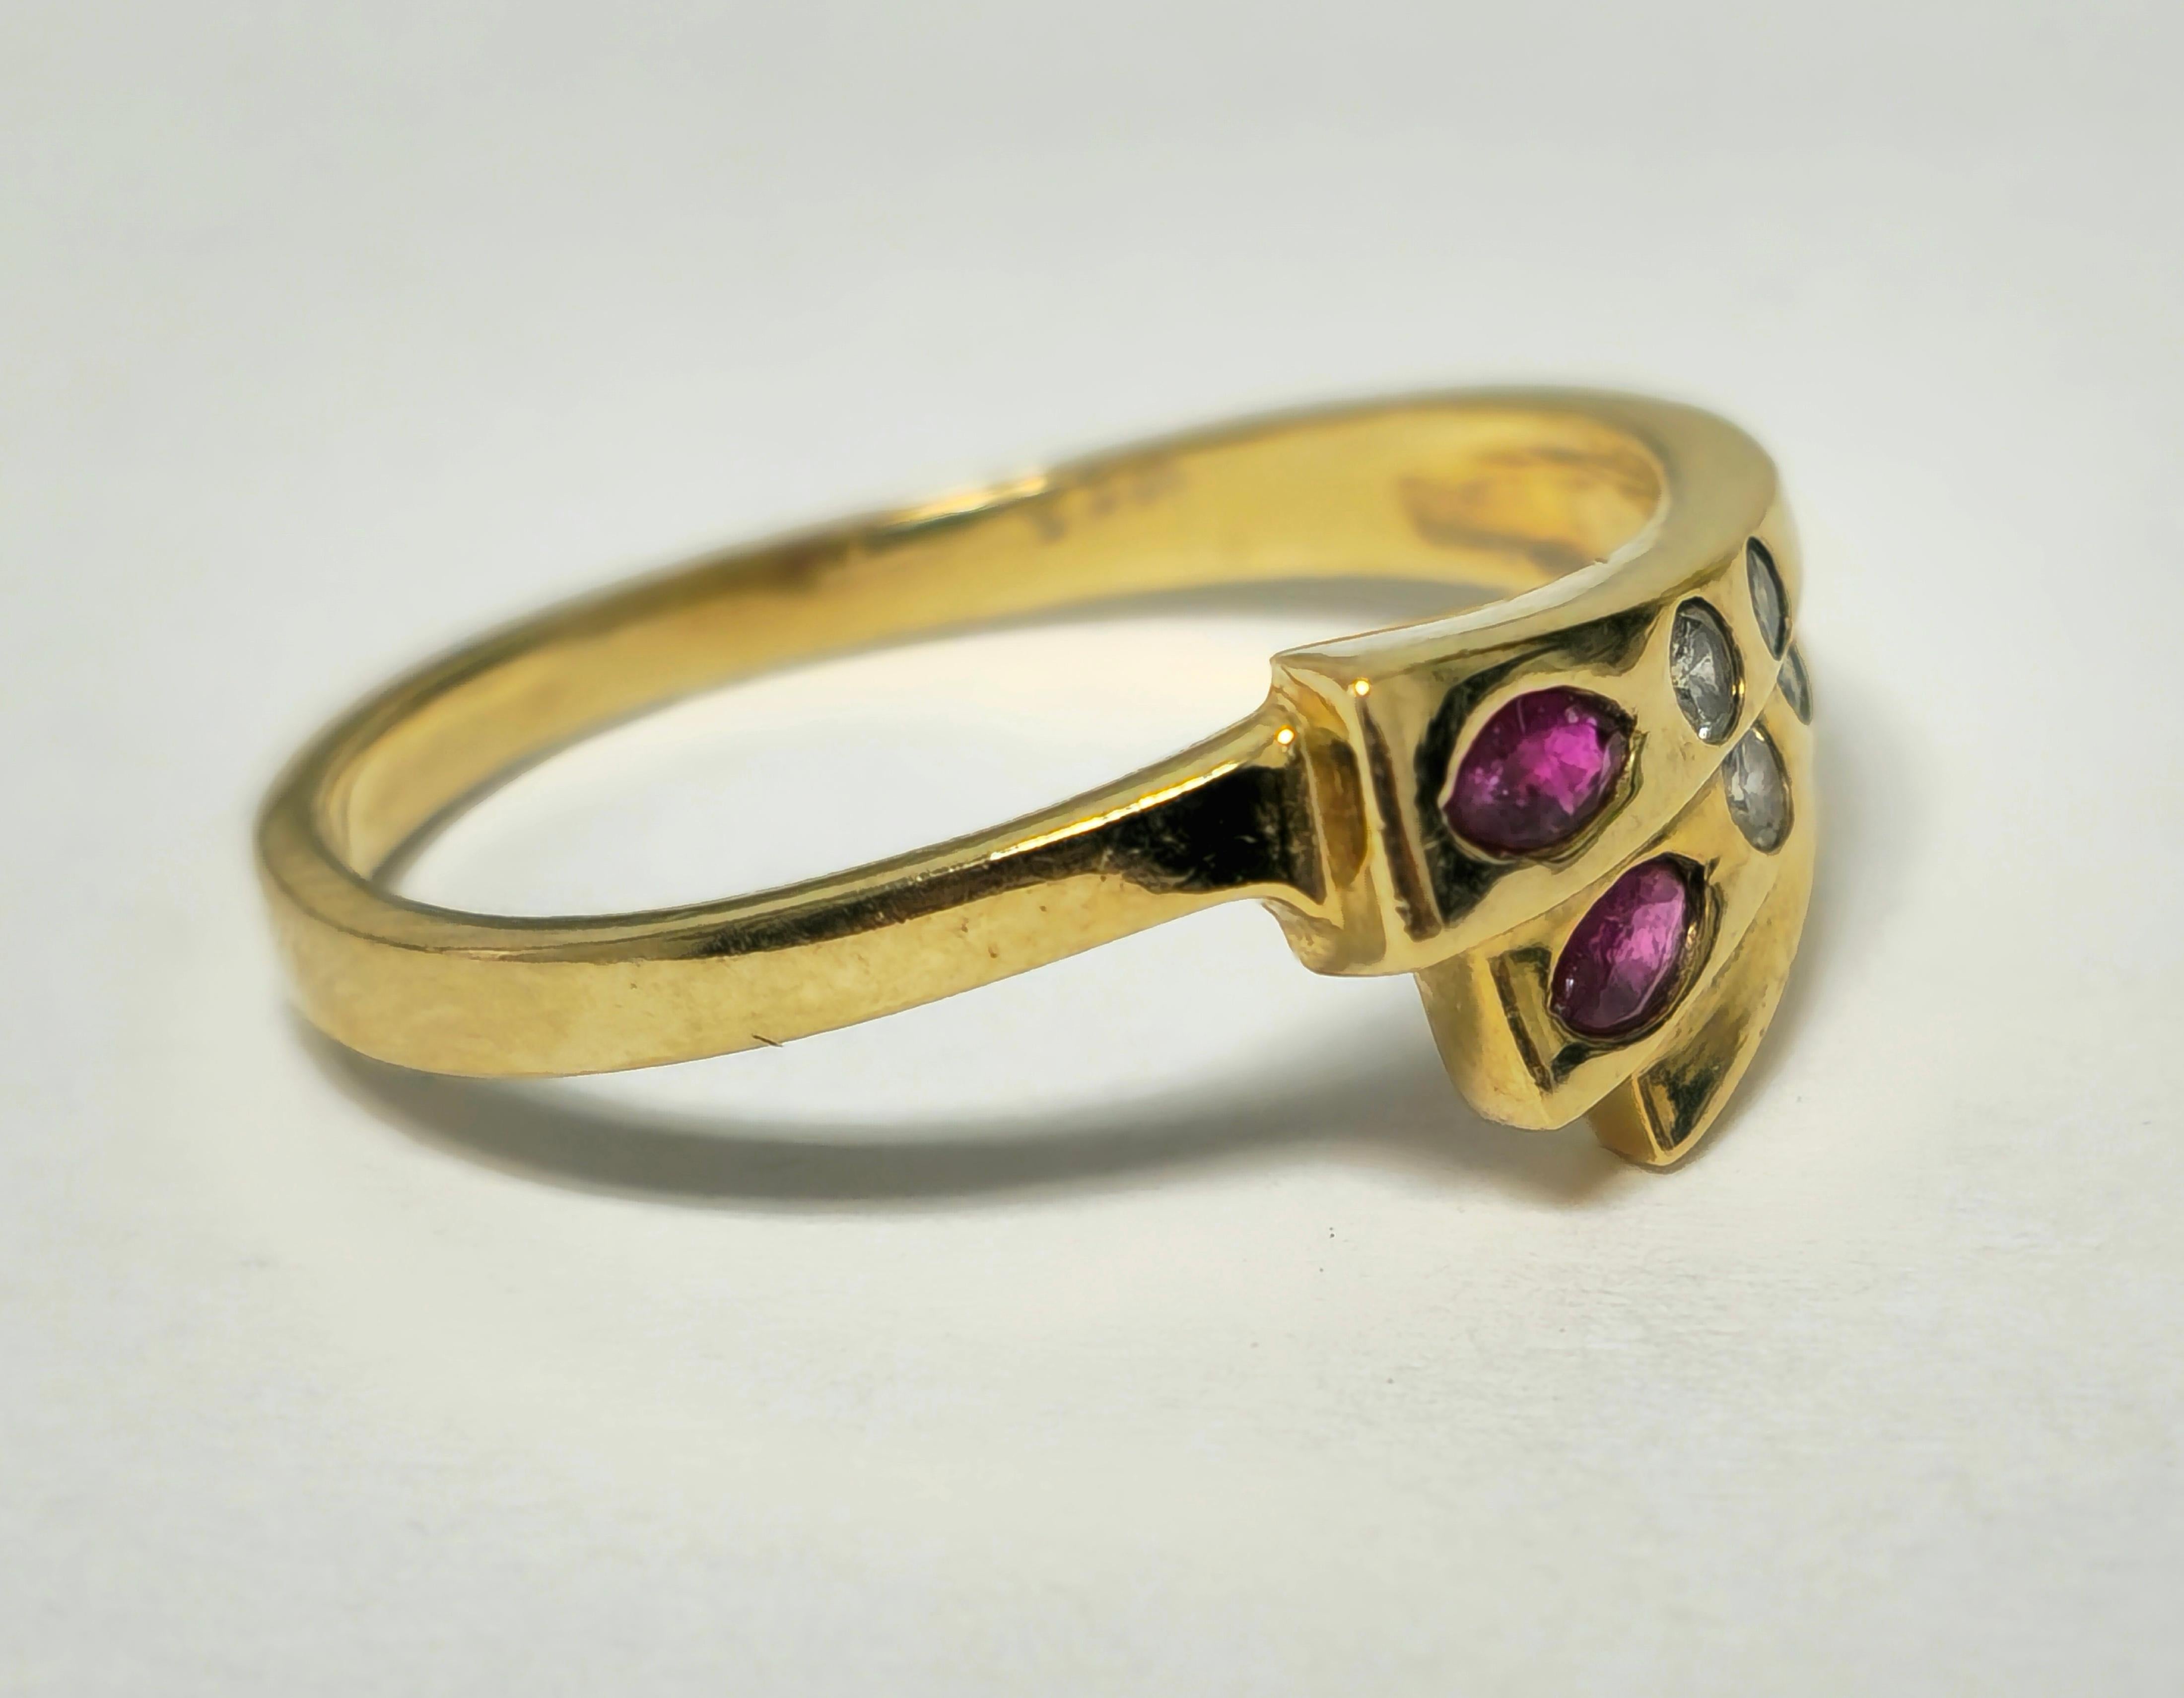 Elevate your style with this vintage diamond and ruby cocktail ring for women, crafted from 14k yellow gold and adorned with a stunning 0.14 carat marquise-shaped ruby, boasting excellent color and saturation. Accentuating the design are 0.18 carats